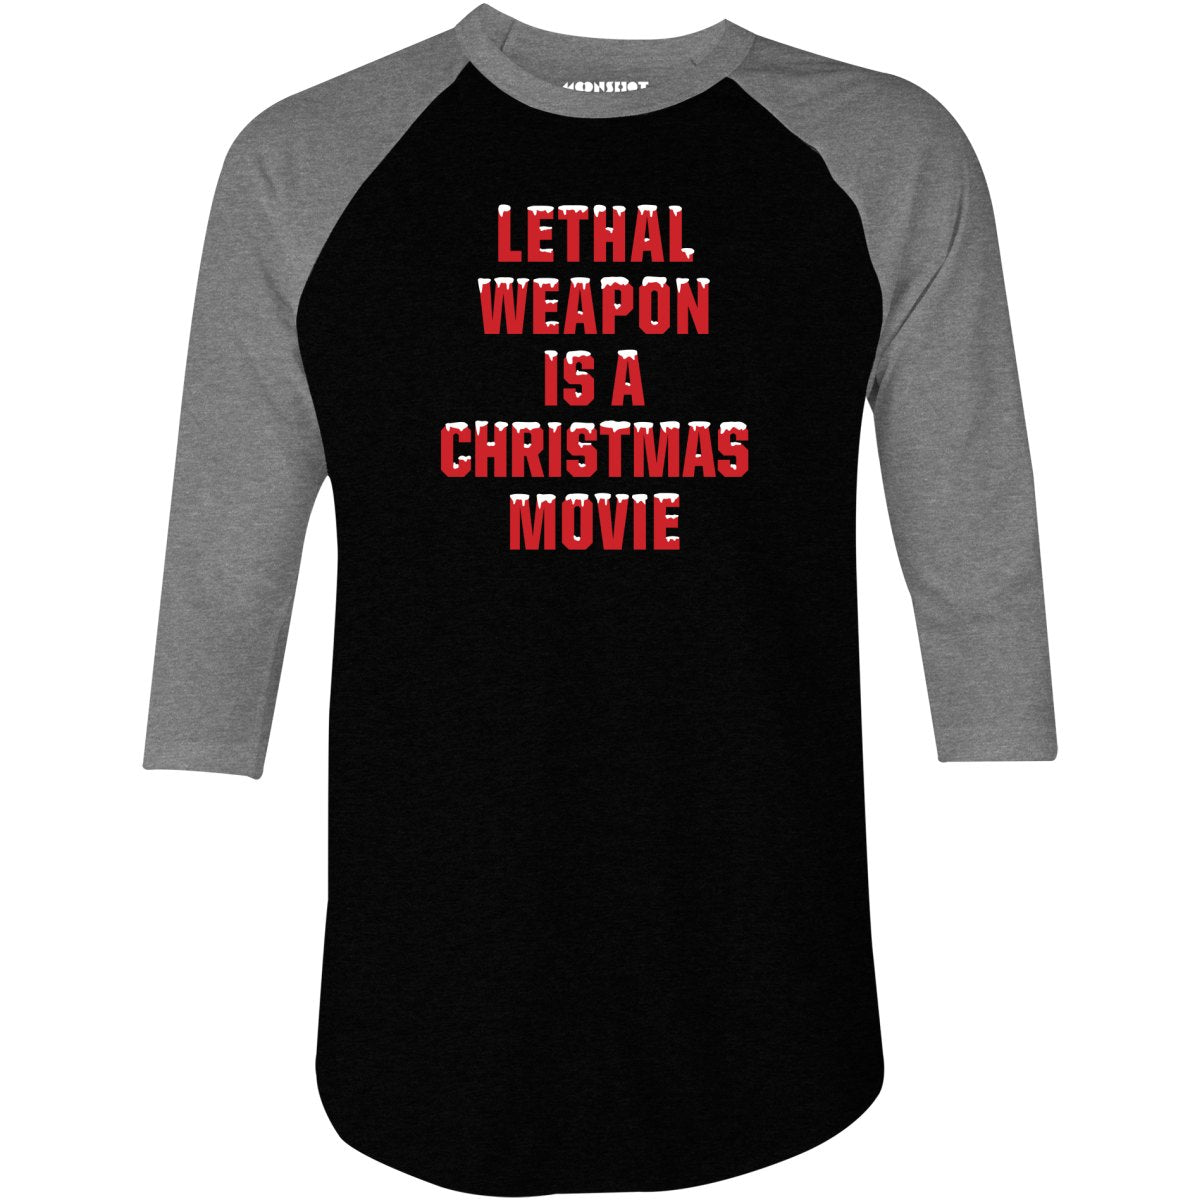 Lethal Weapon is a Christmas Movie - 3/4 Sleeve Raglan T-Shirt